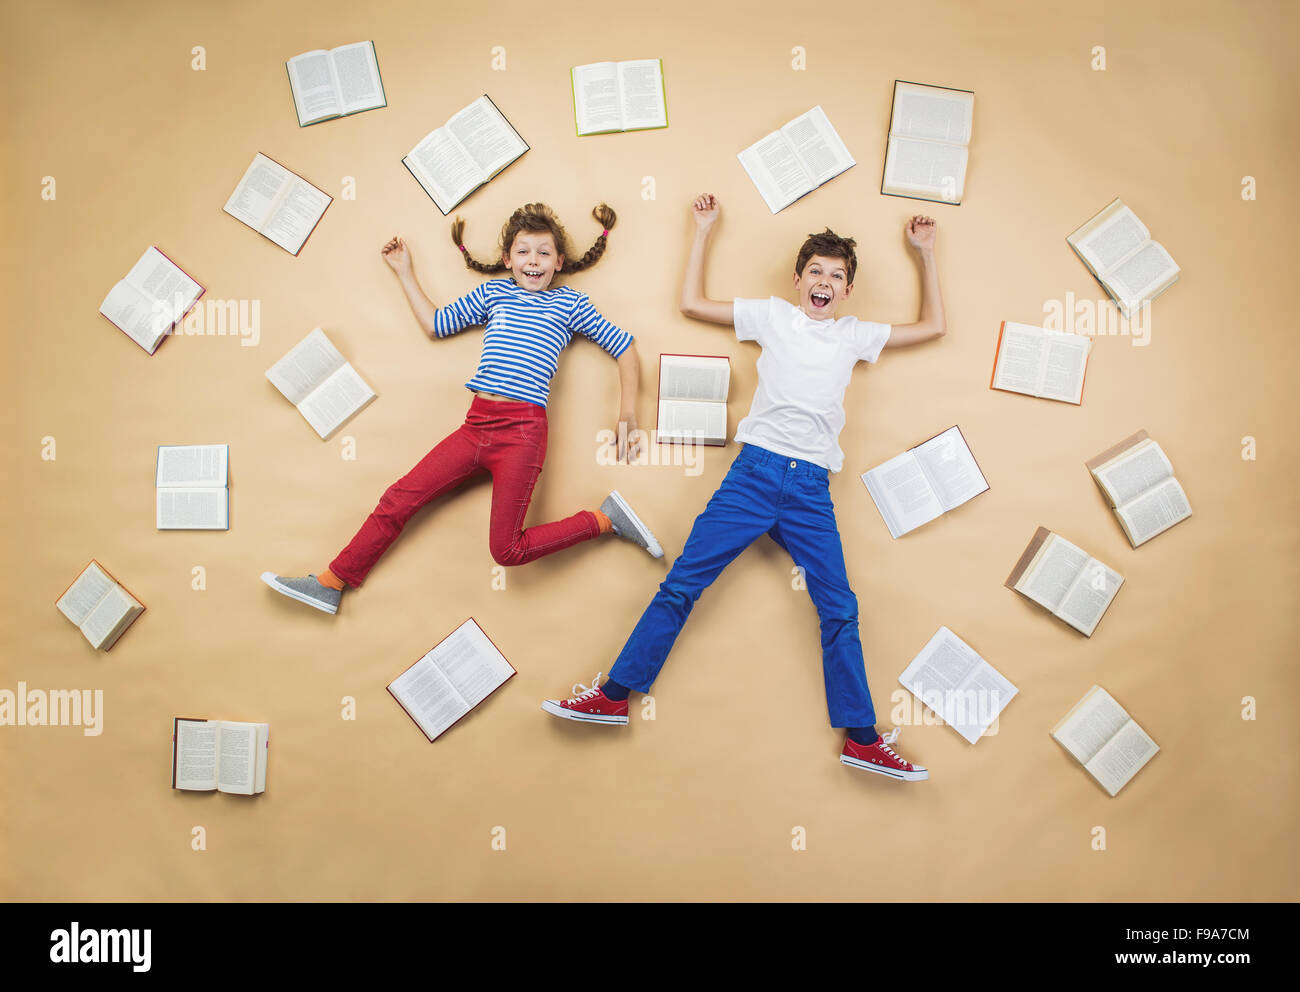 Happy children lying on the floor with group of books Stock Photo